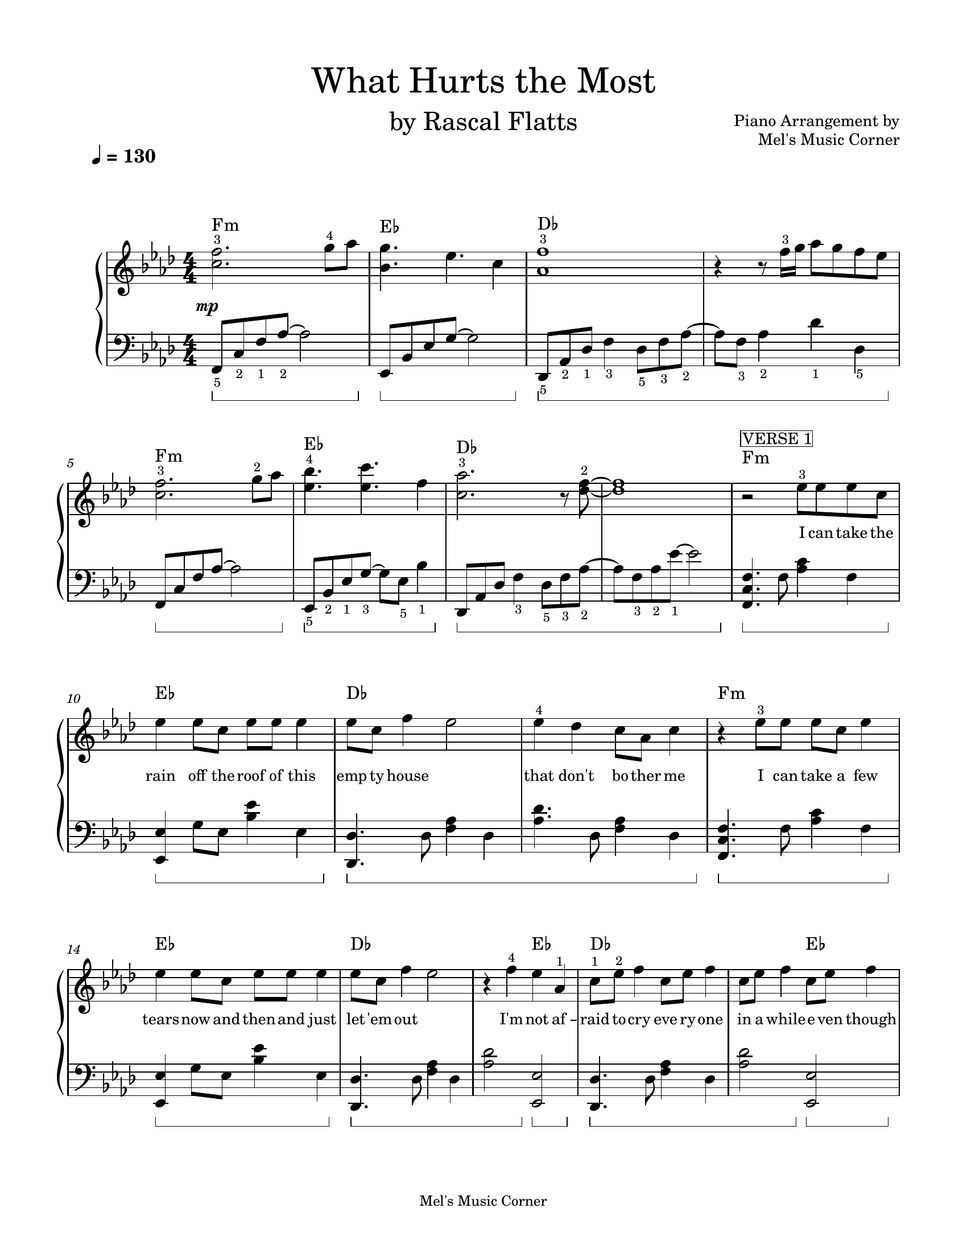 Rascal Flatts - What Hurts the Most (piano sheet music) by Mel's Music Corner